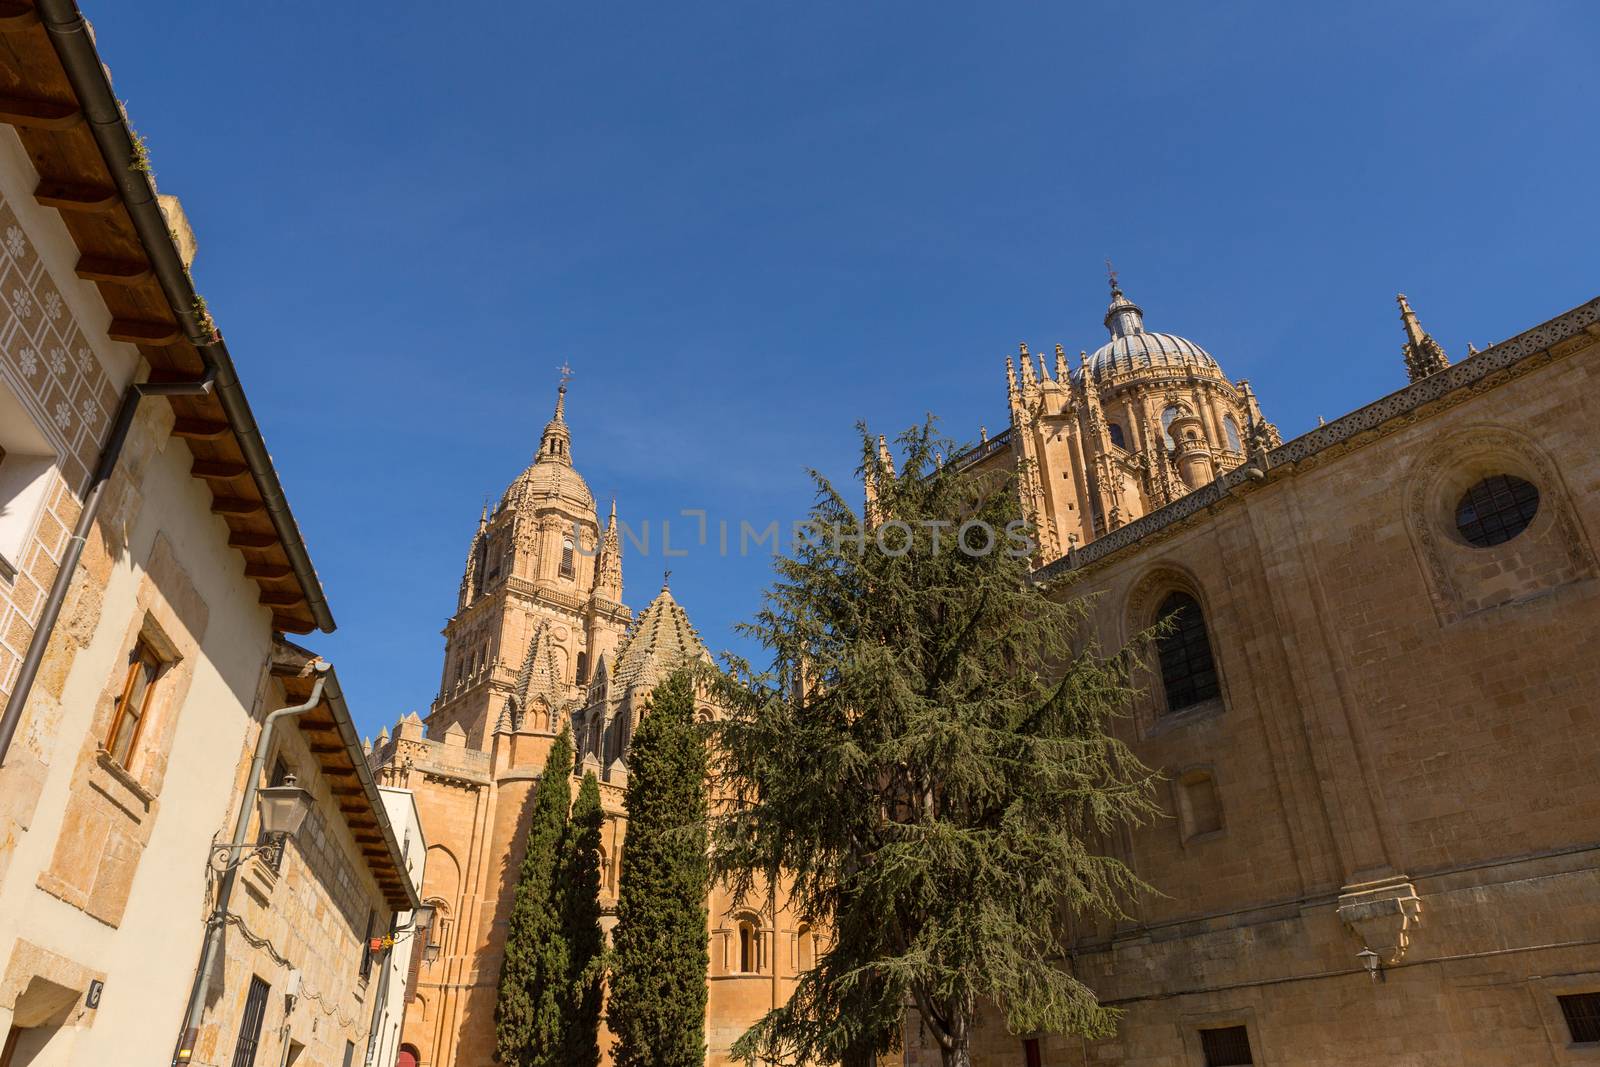 View of the historical Salamanca Cathedral, Spain